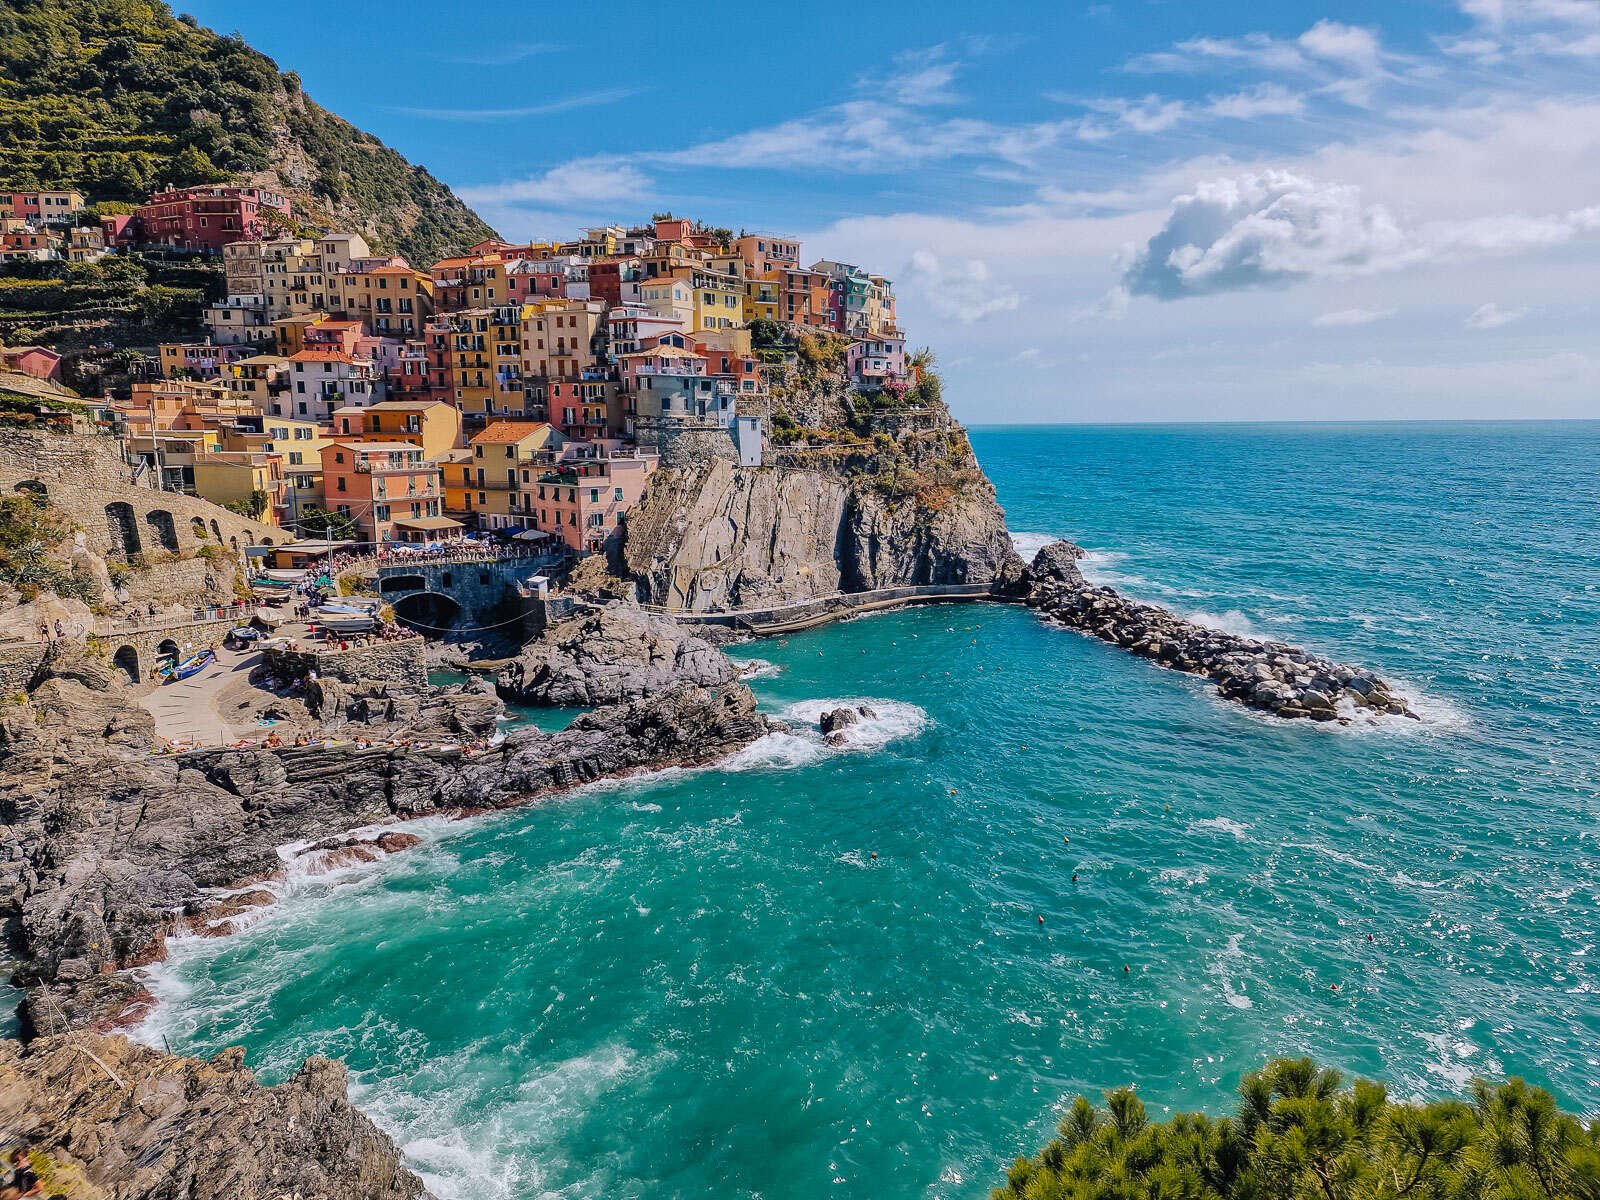 Panoramic view point of Manarola looking across the harbour with turquoise water and rocky shoreline with the colourful houses of Manarola Cinque Terre on the cliff, in orange, pink, yellow. Green hills to the left and sea out to the right. Blue sky